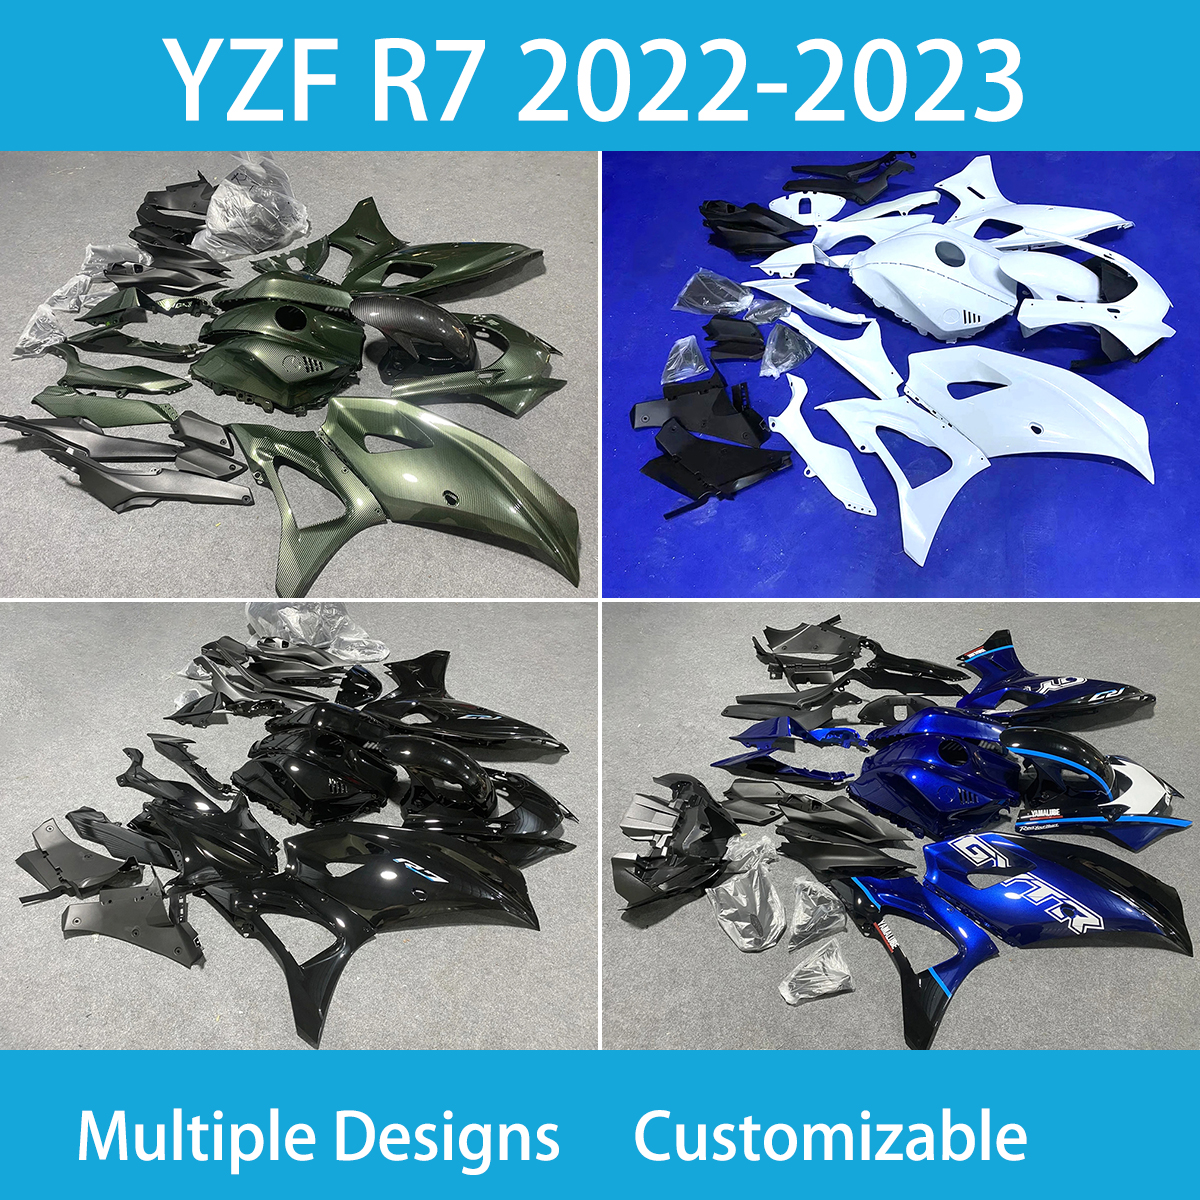 High Quality Fairing Kit for Yamaha YZFR7 2022-2023 Year Injection Molded Cowling Motorcycle Full Fairings Set YZF R7 22 23 YEAR ABS Plastic Bodywork